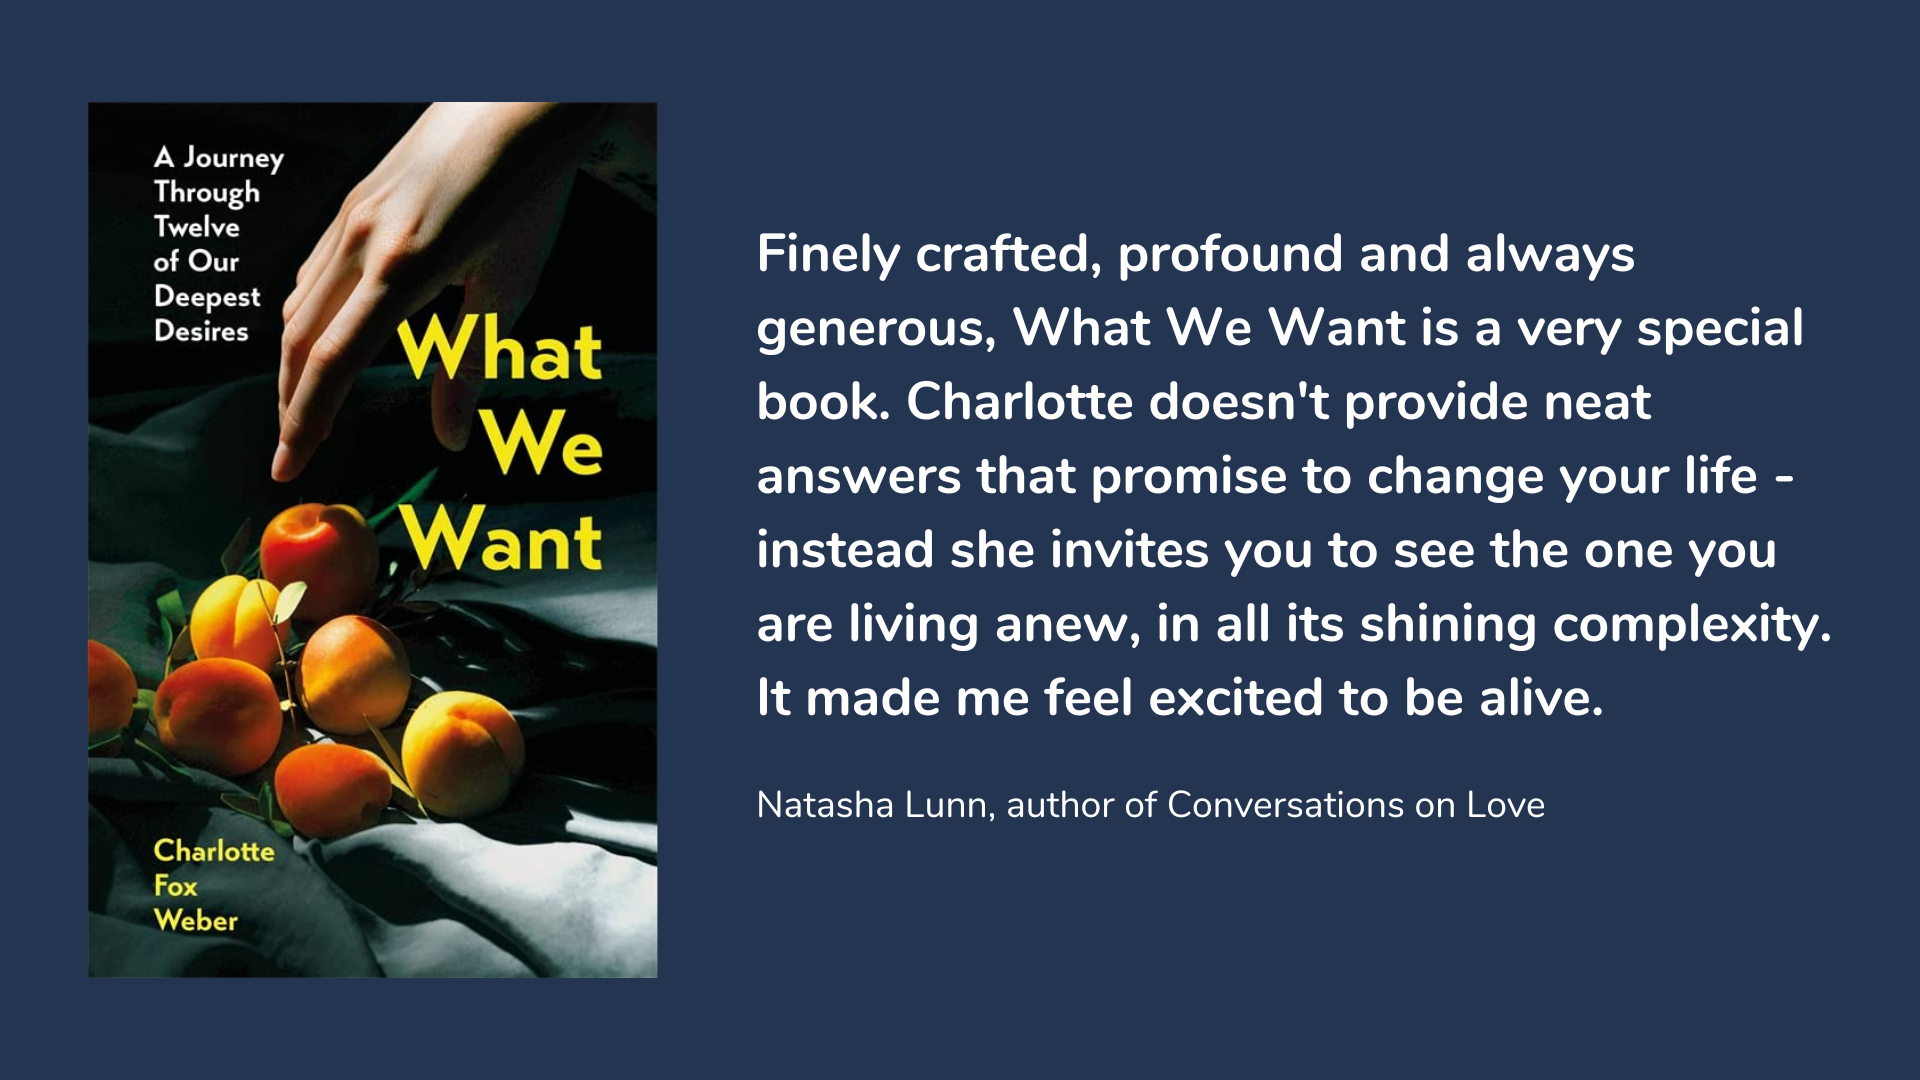 What We Want: A Journey Through Twelve of Our Deepest Desires, book cover and description.